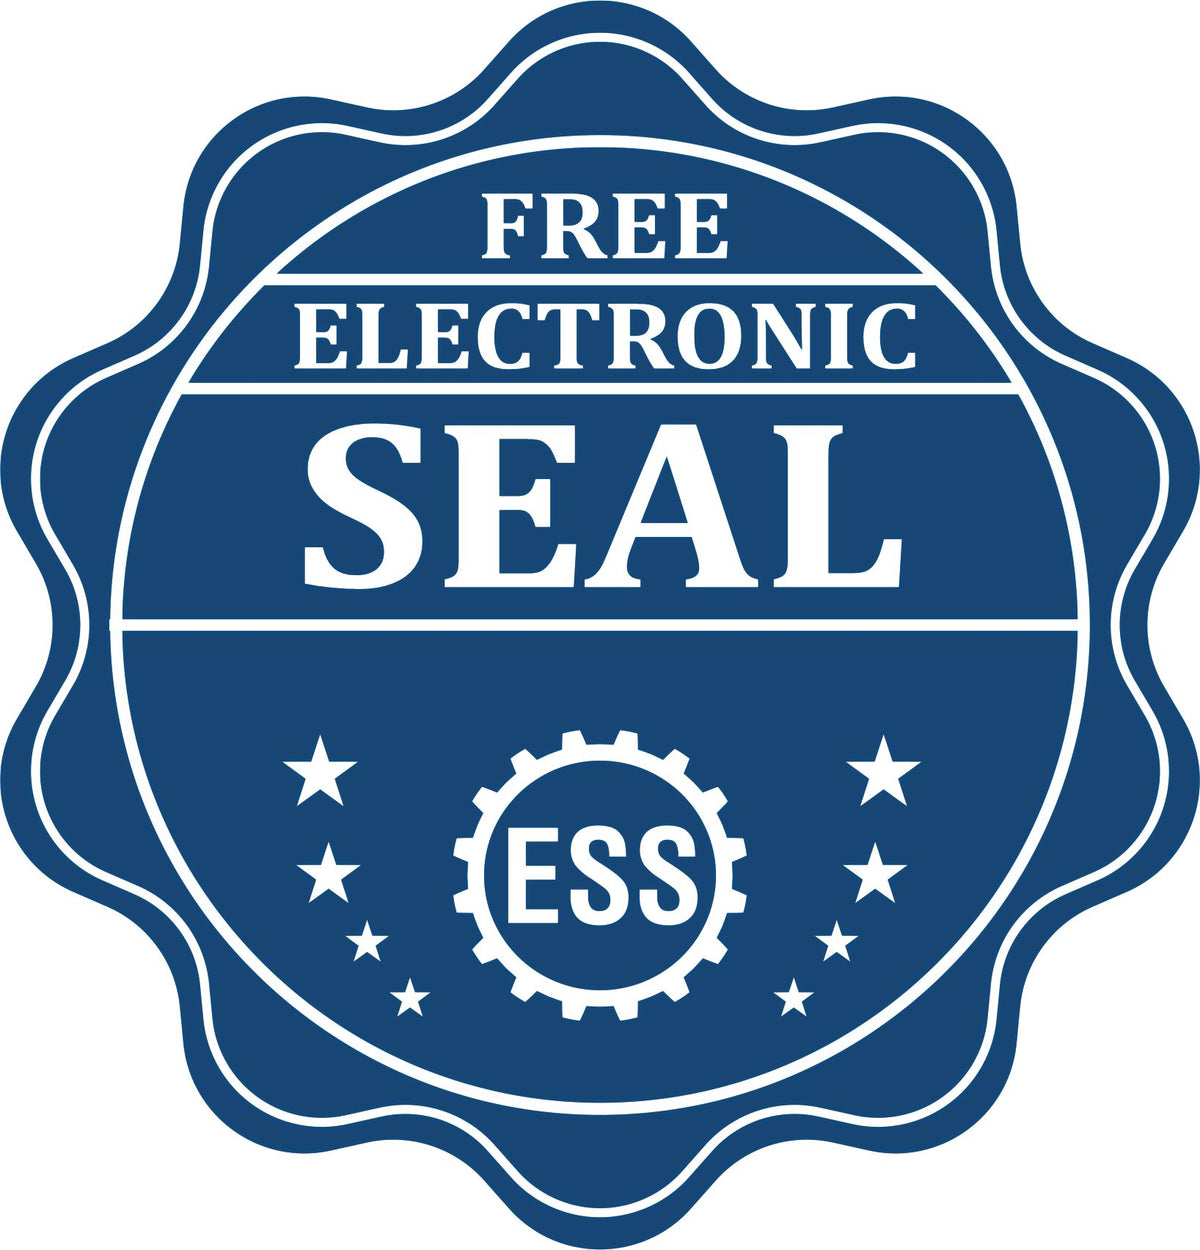 A badge showing a free electronic seal for the Arkansas Engineer Desk Seal with stars and the ESS gear on the emblem.